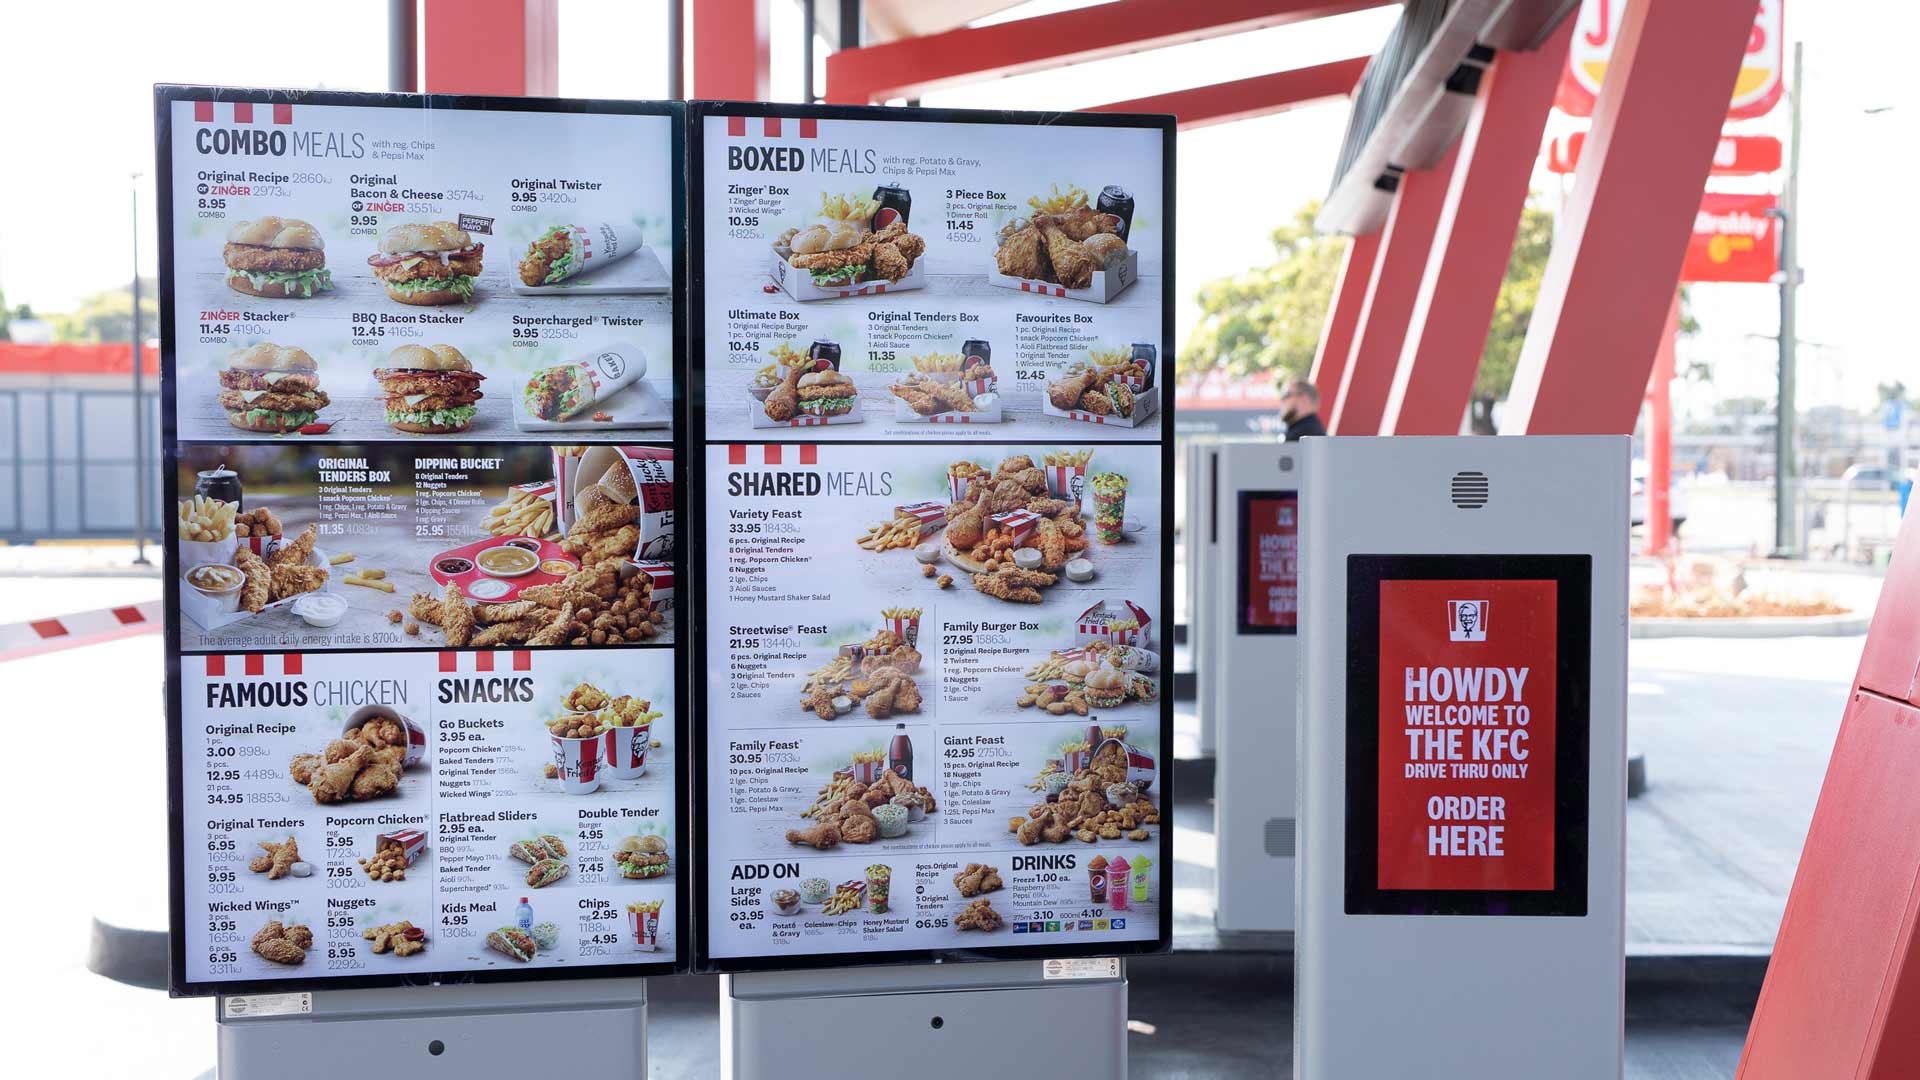 The World's First Drive-Thru-Only KFC Has Opened in Australia